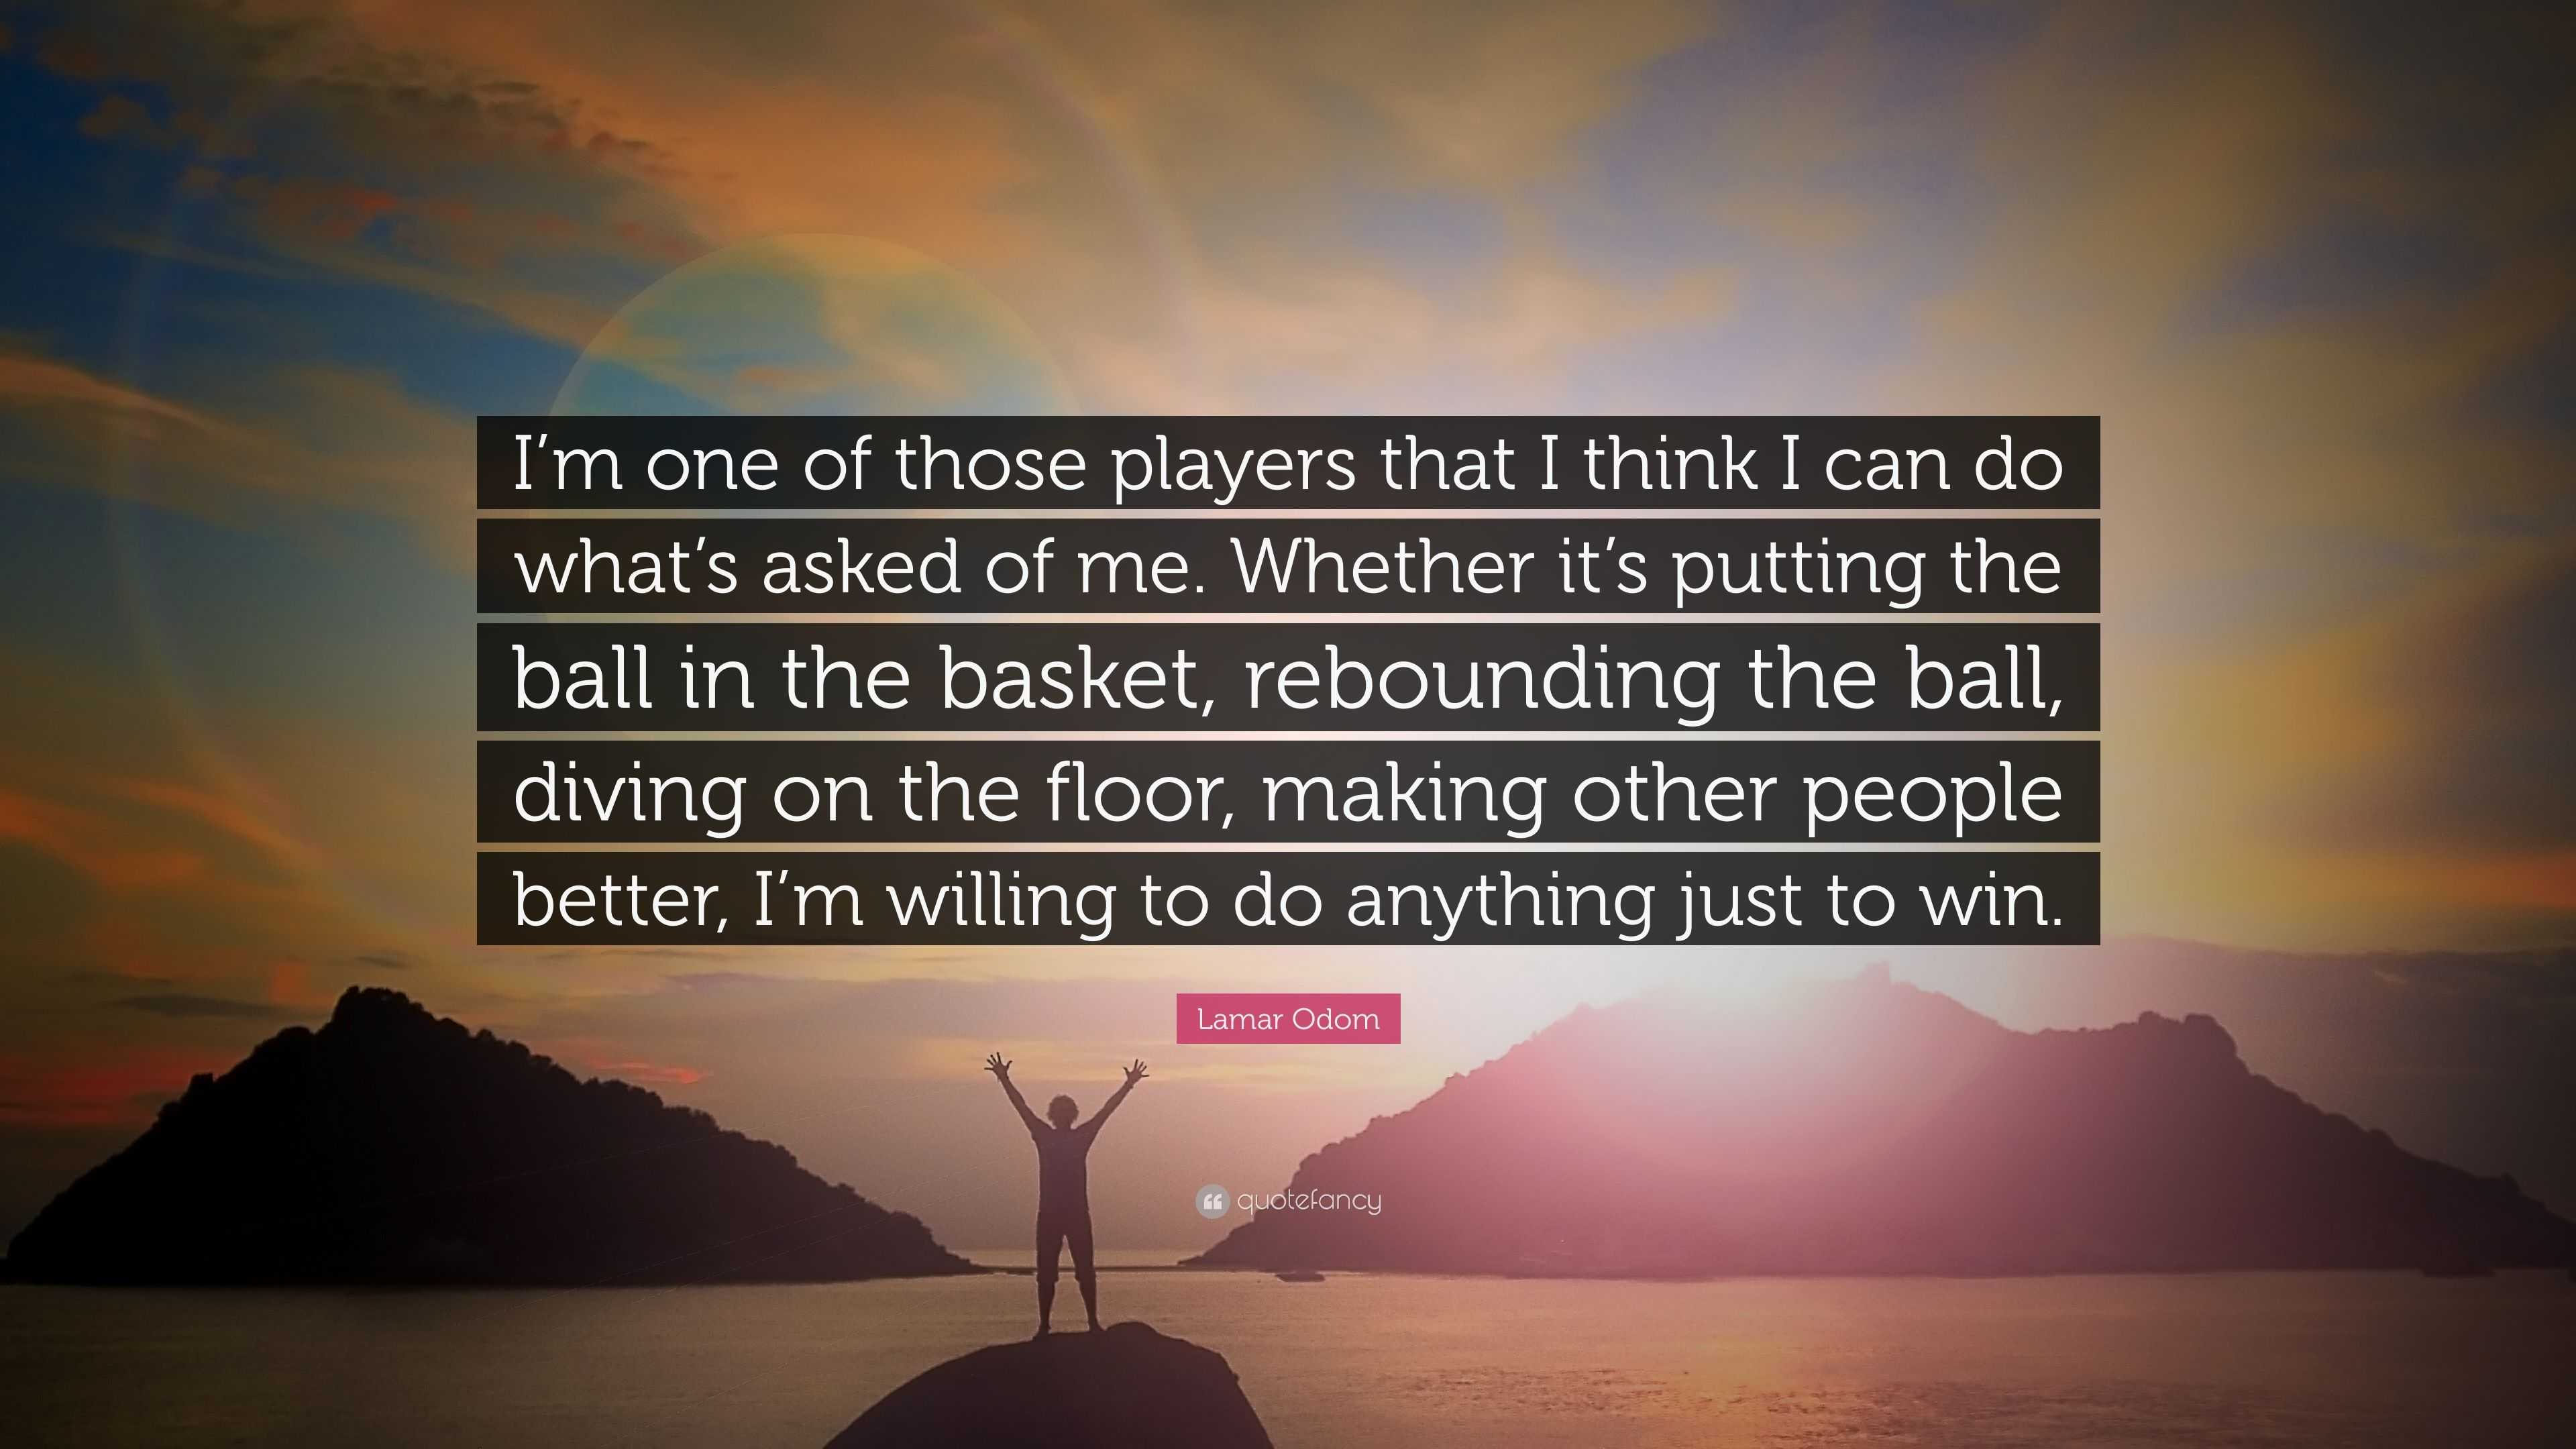 Lamar Odom Quote: “I’m one of those players that I think I can do what ...